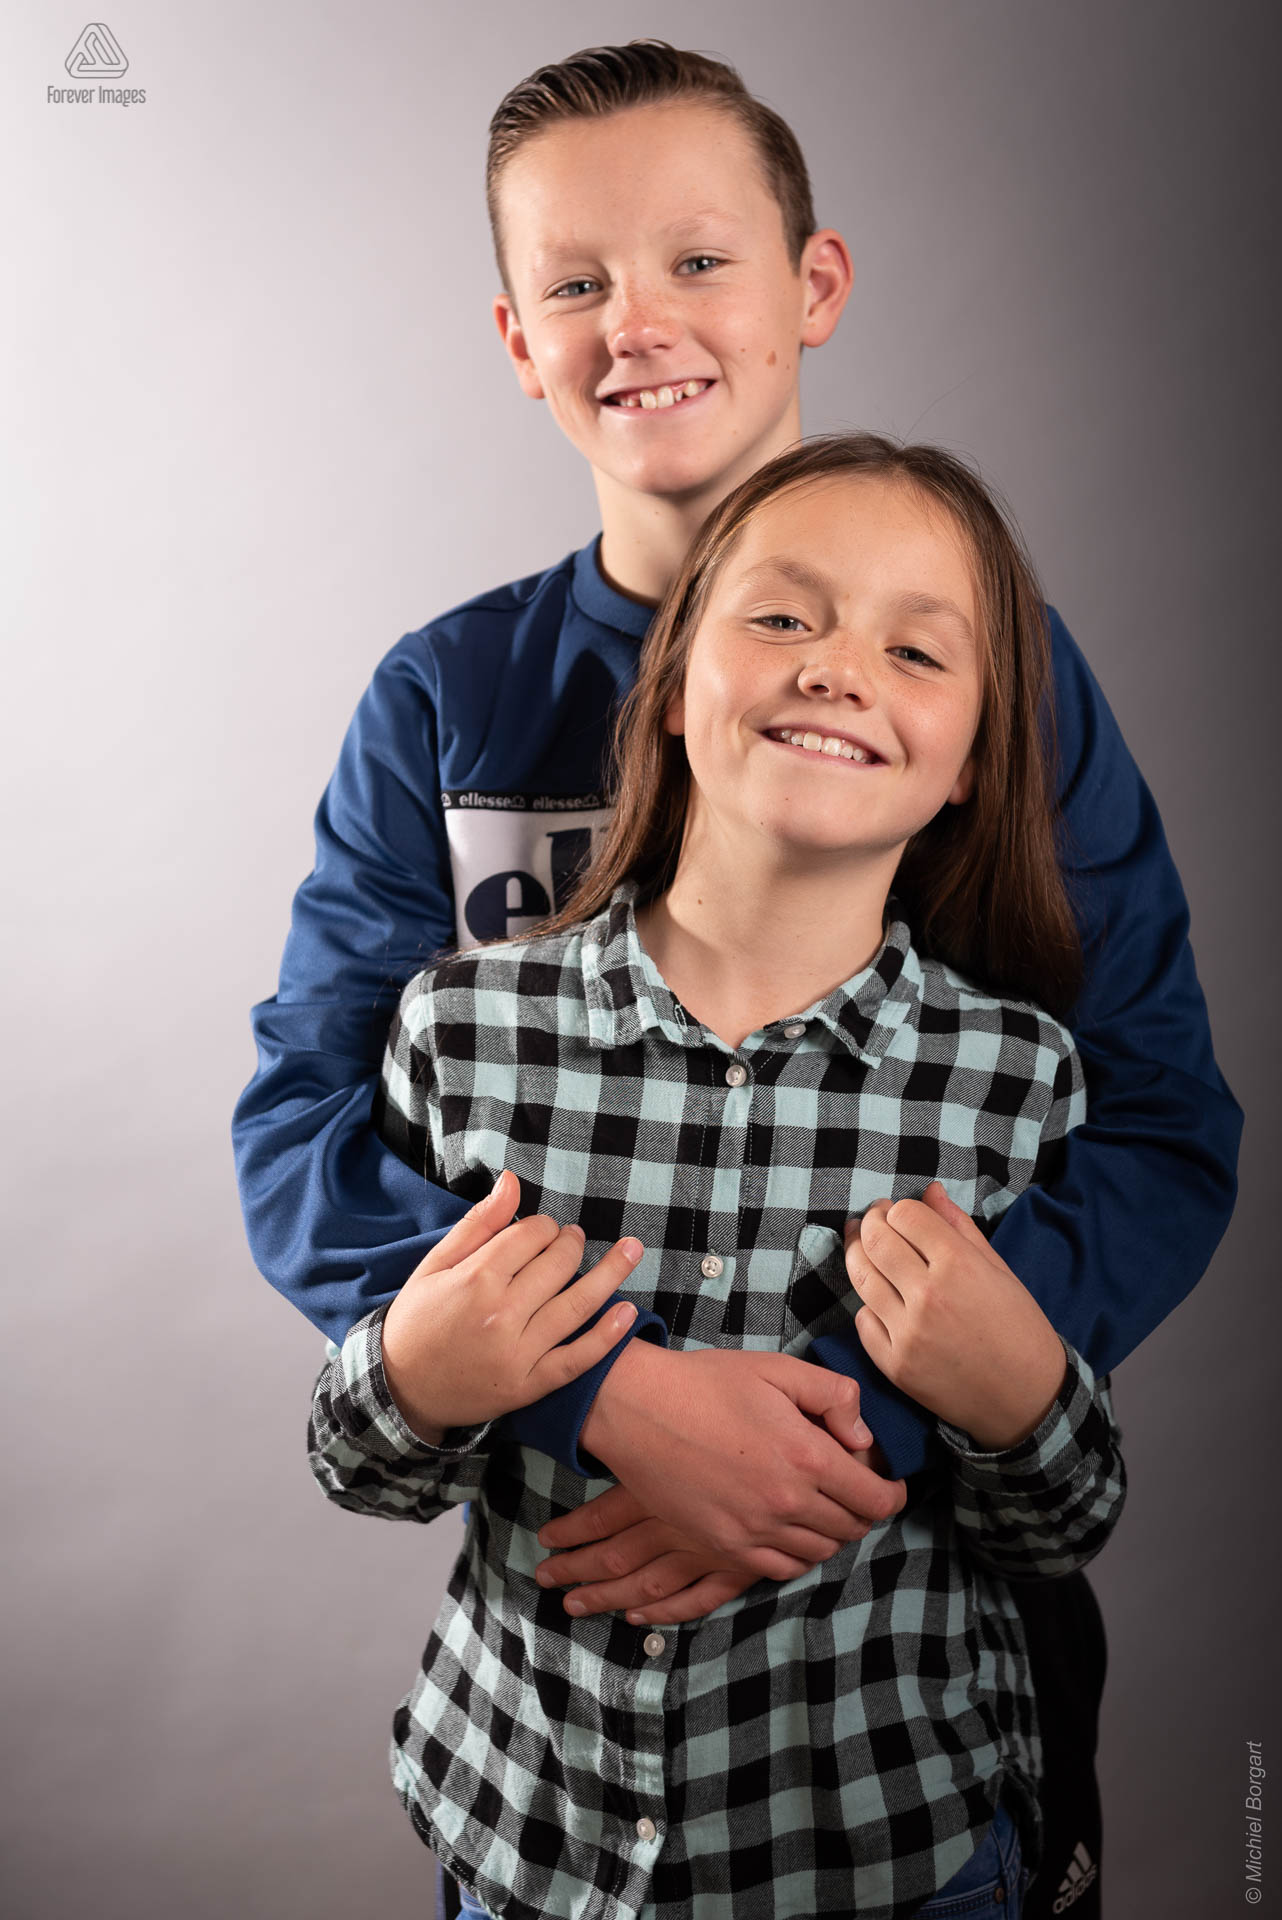 Portrait photo of a big brother with sister in his arms | Portrait Photographer Michiel Borgart - Forever Images.